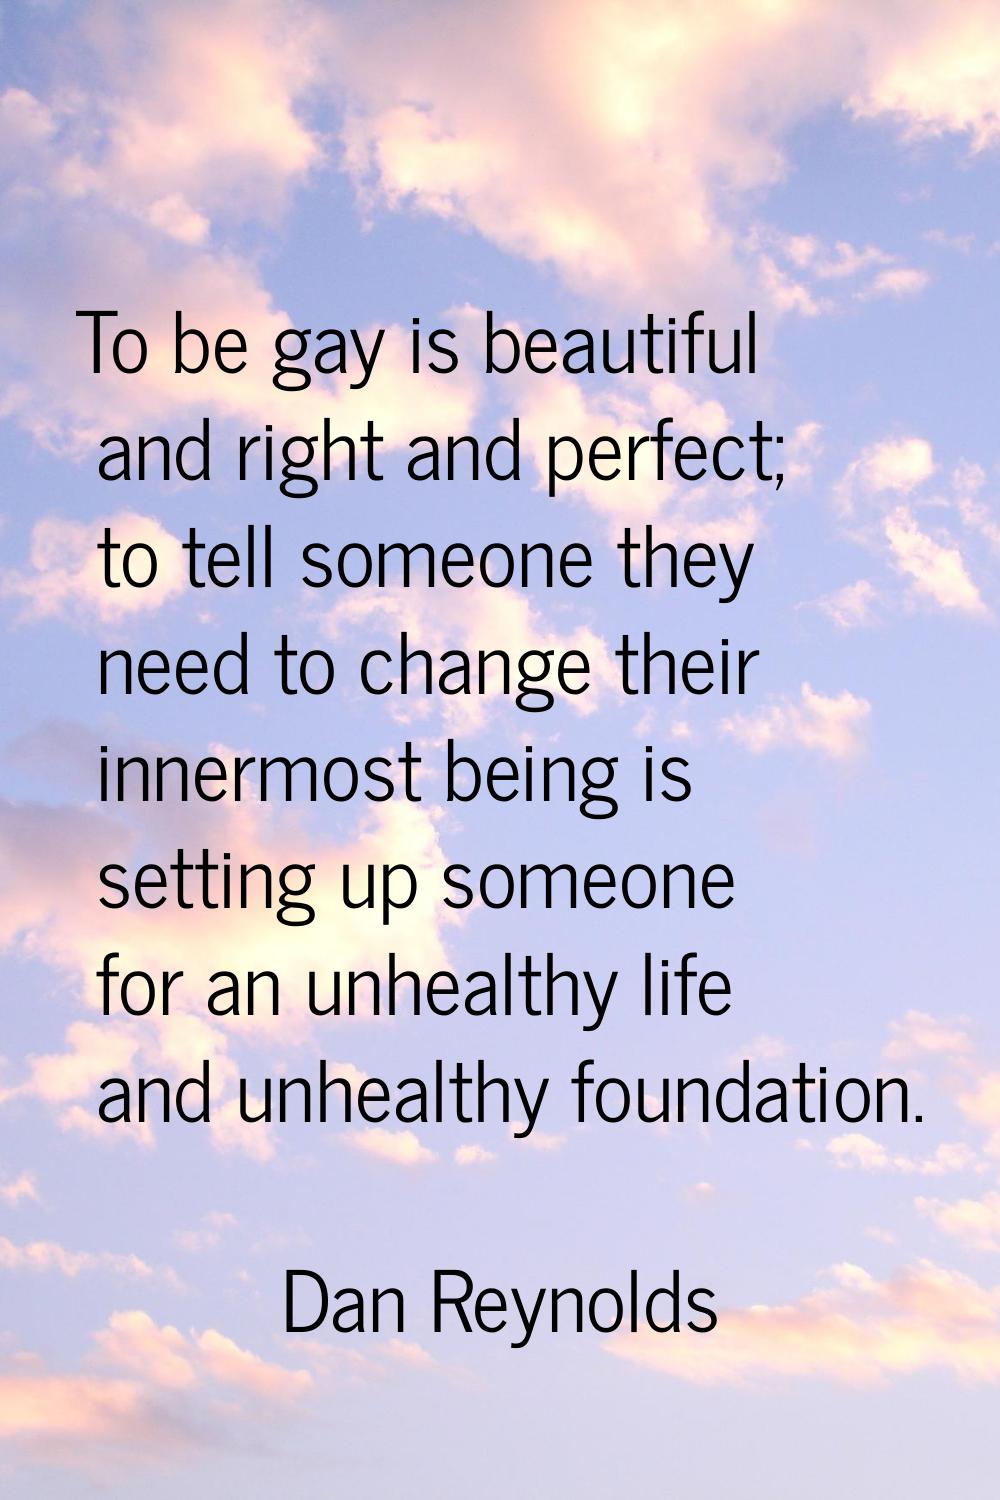 To be gay is beautiful and right and perfect; to tell someone they need to change their innermost b